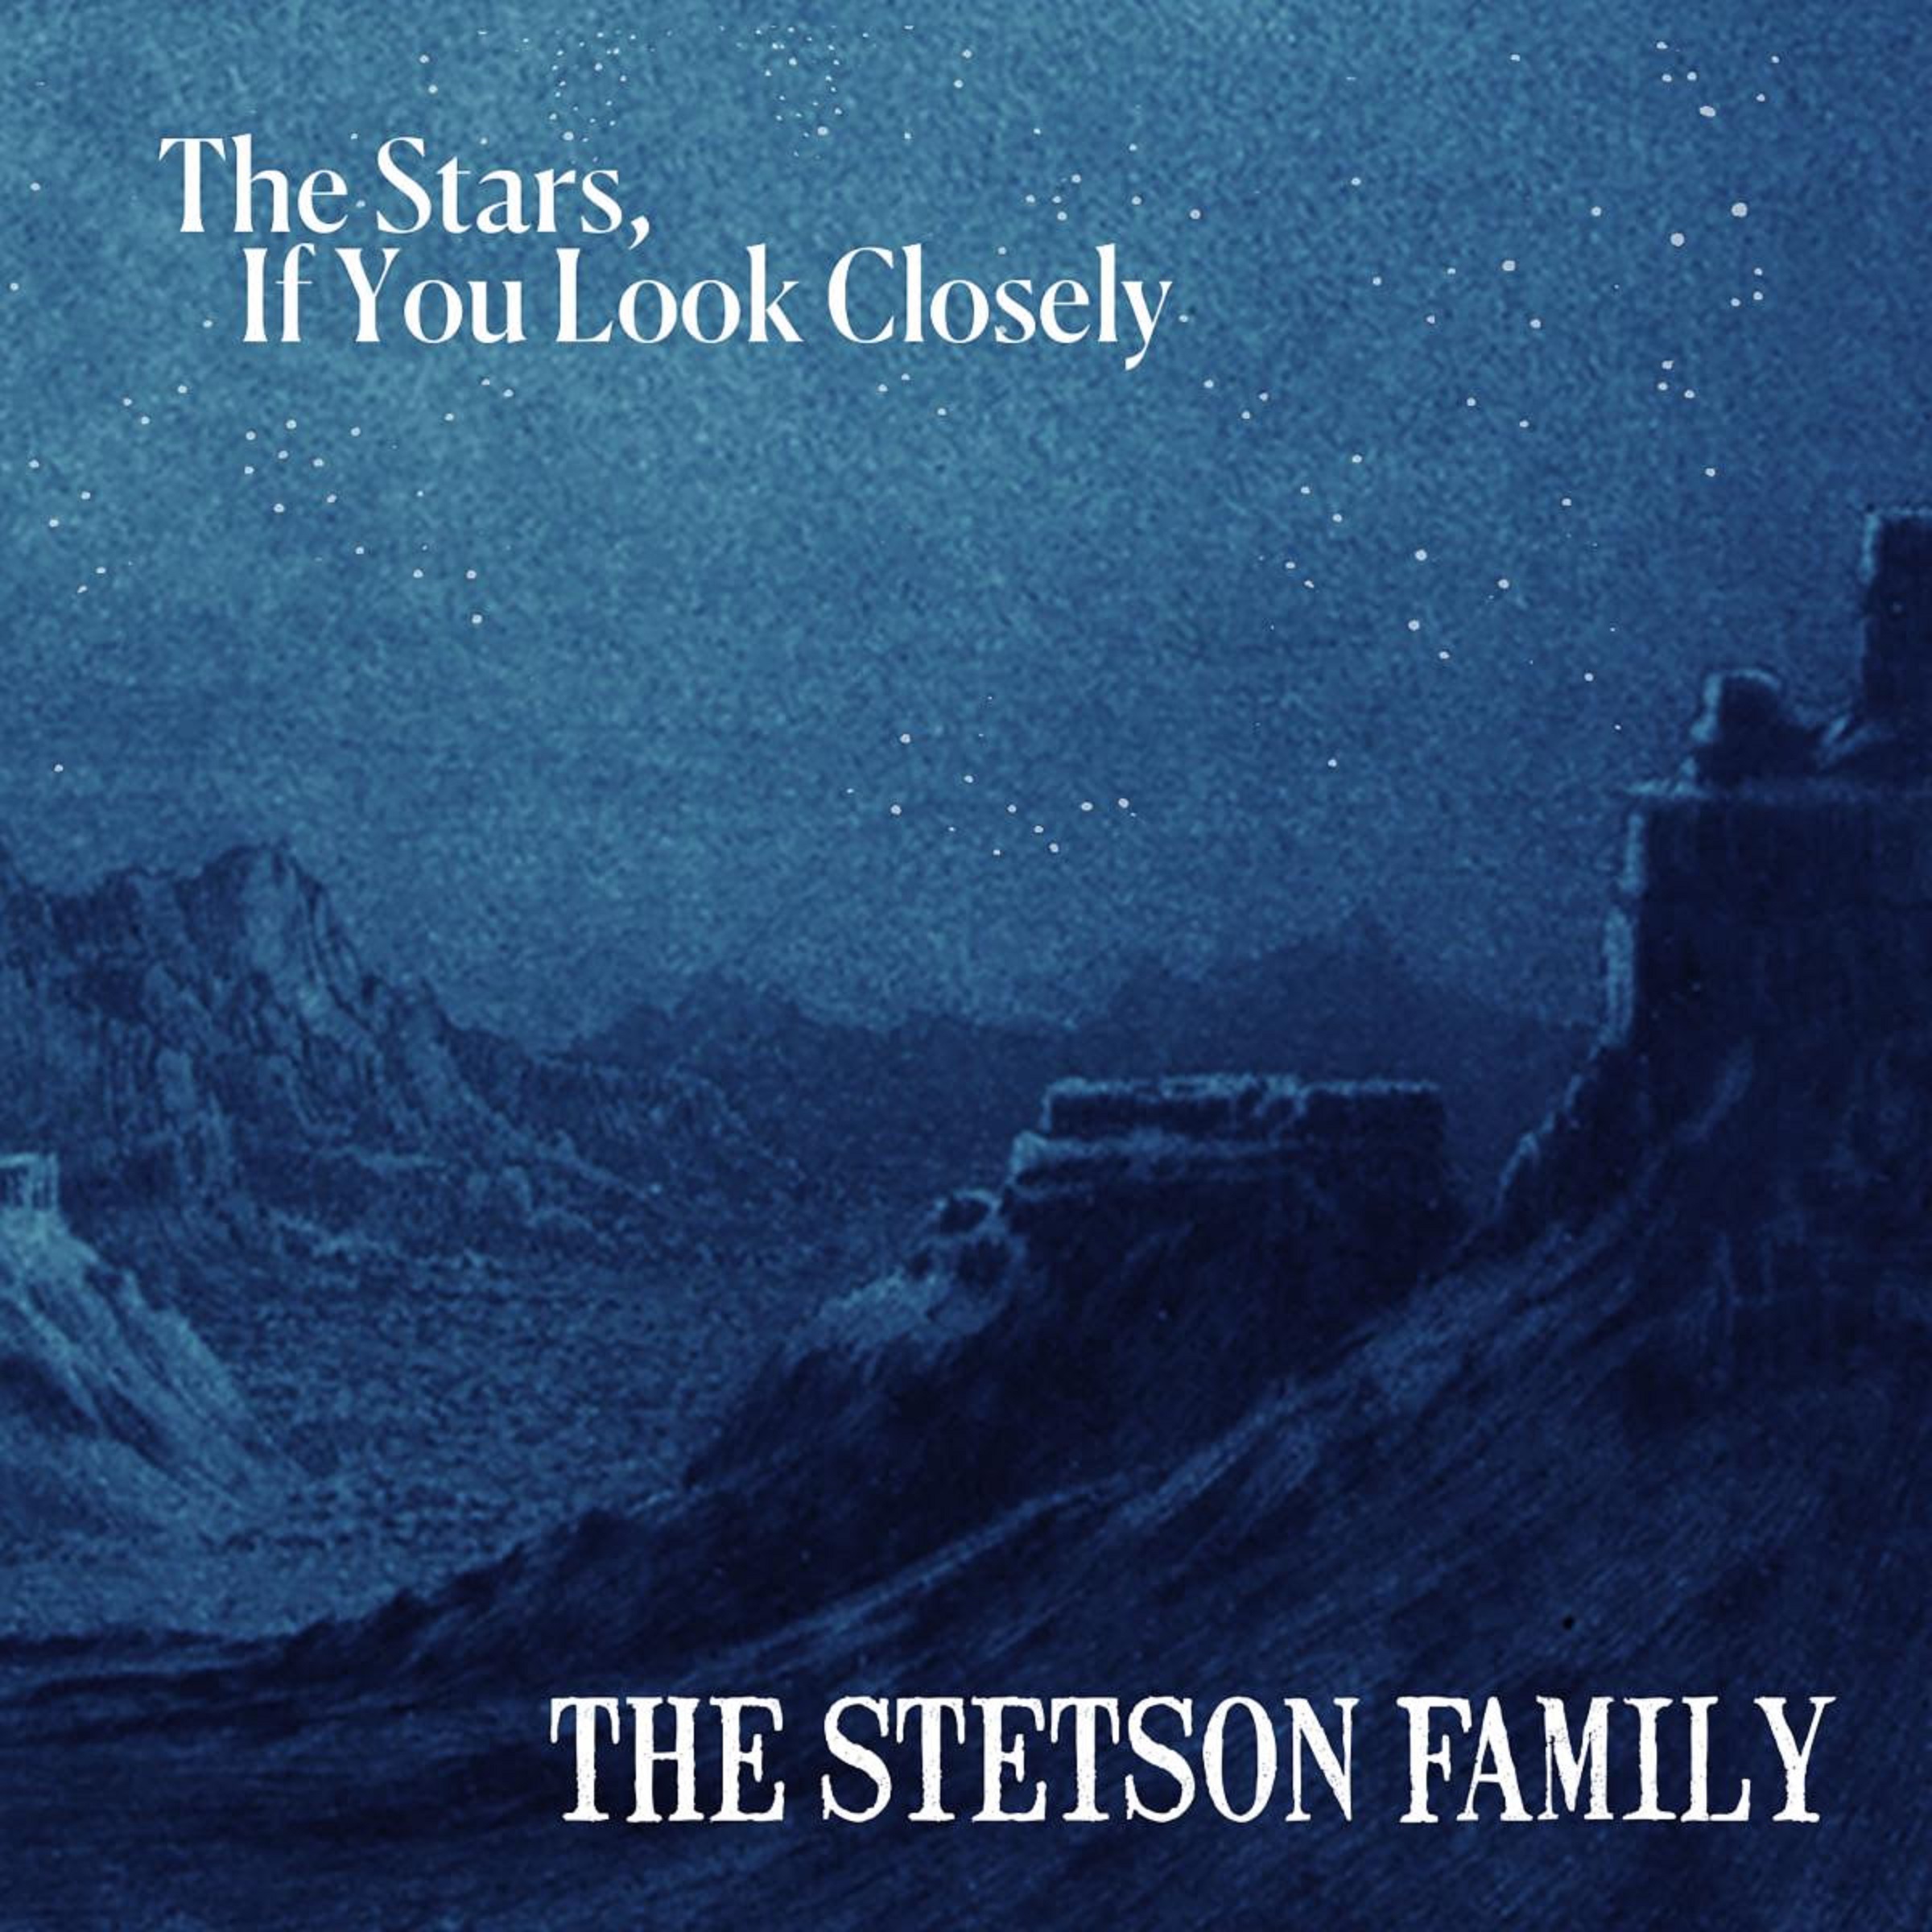 Australia’s Award-Winning Americana/Bluegrassers THE STETSON FAMILY Announce New CD, The Stars, If You Look Closely